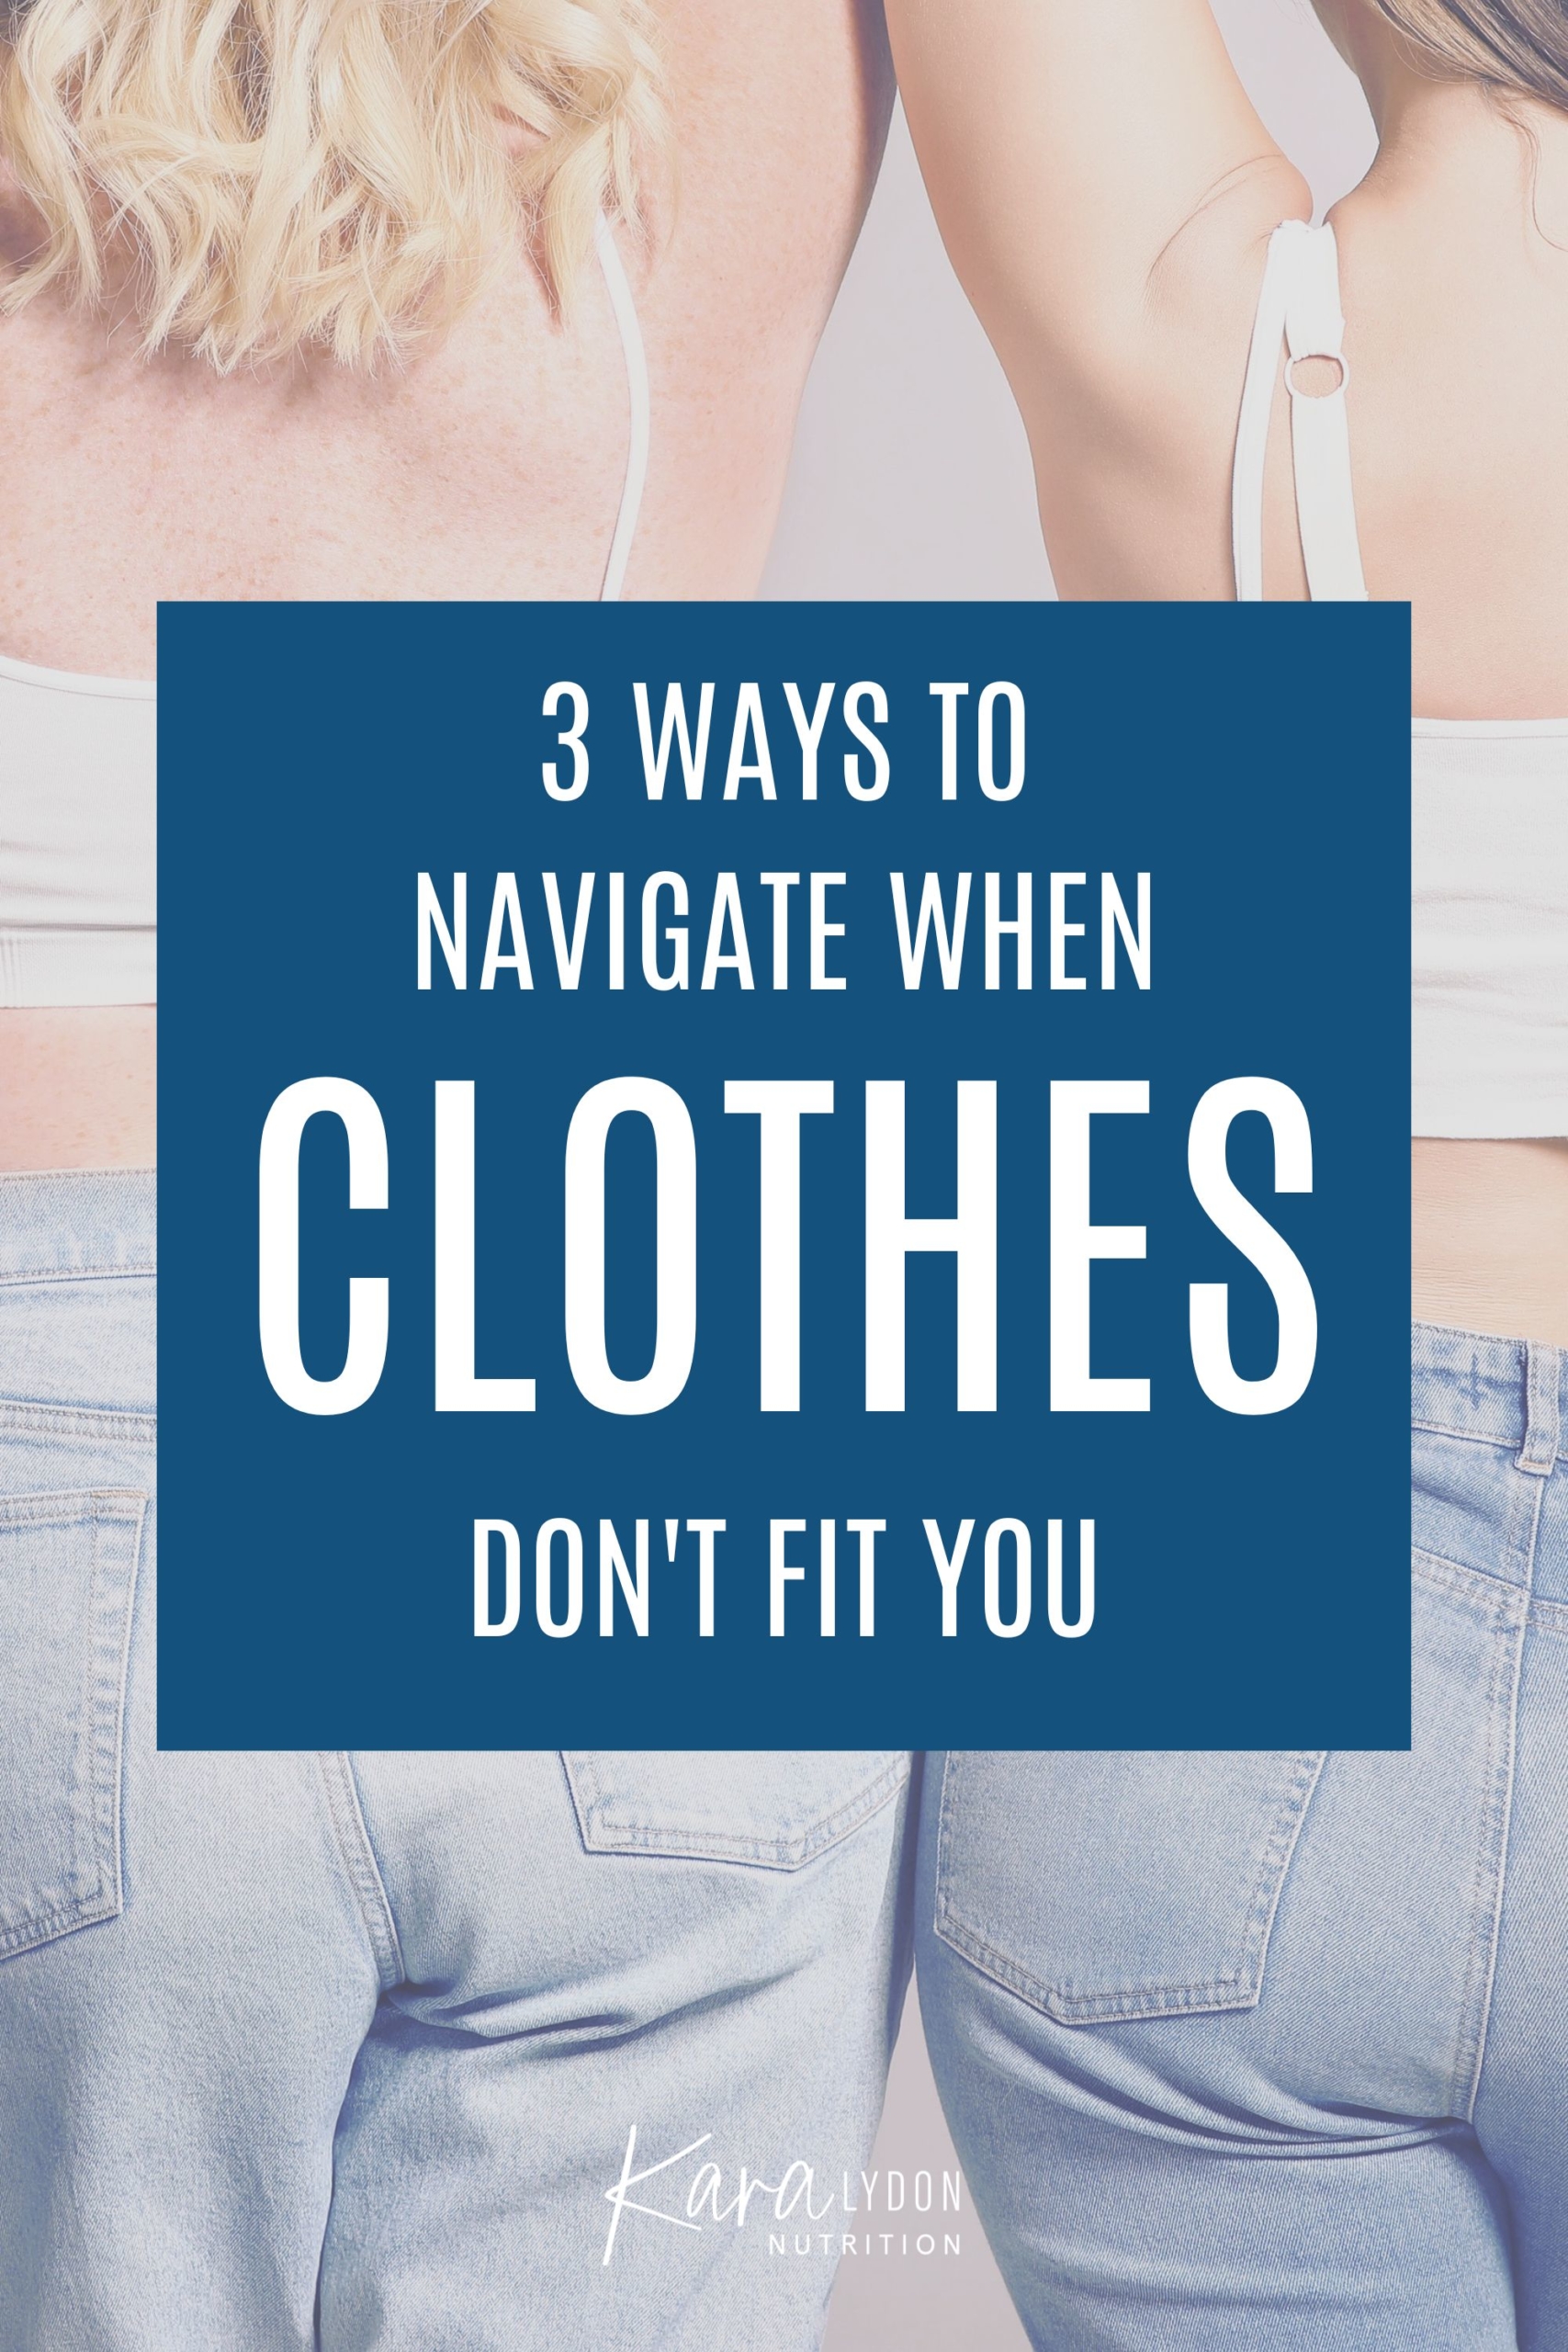 3 Ways to Navigate When Clothes Don't Fit You (without another diet!)